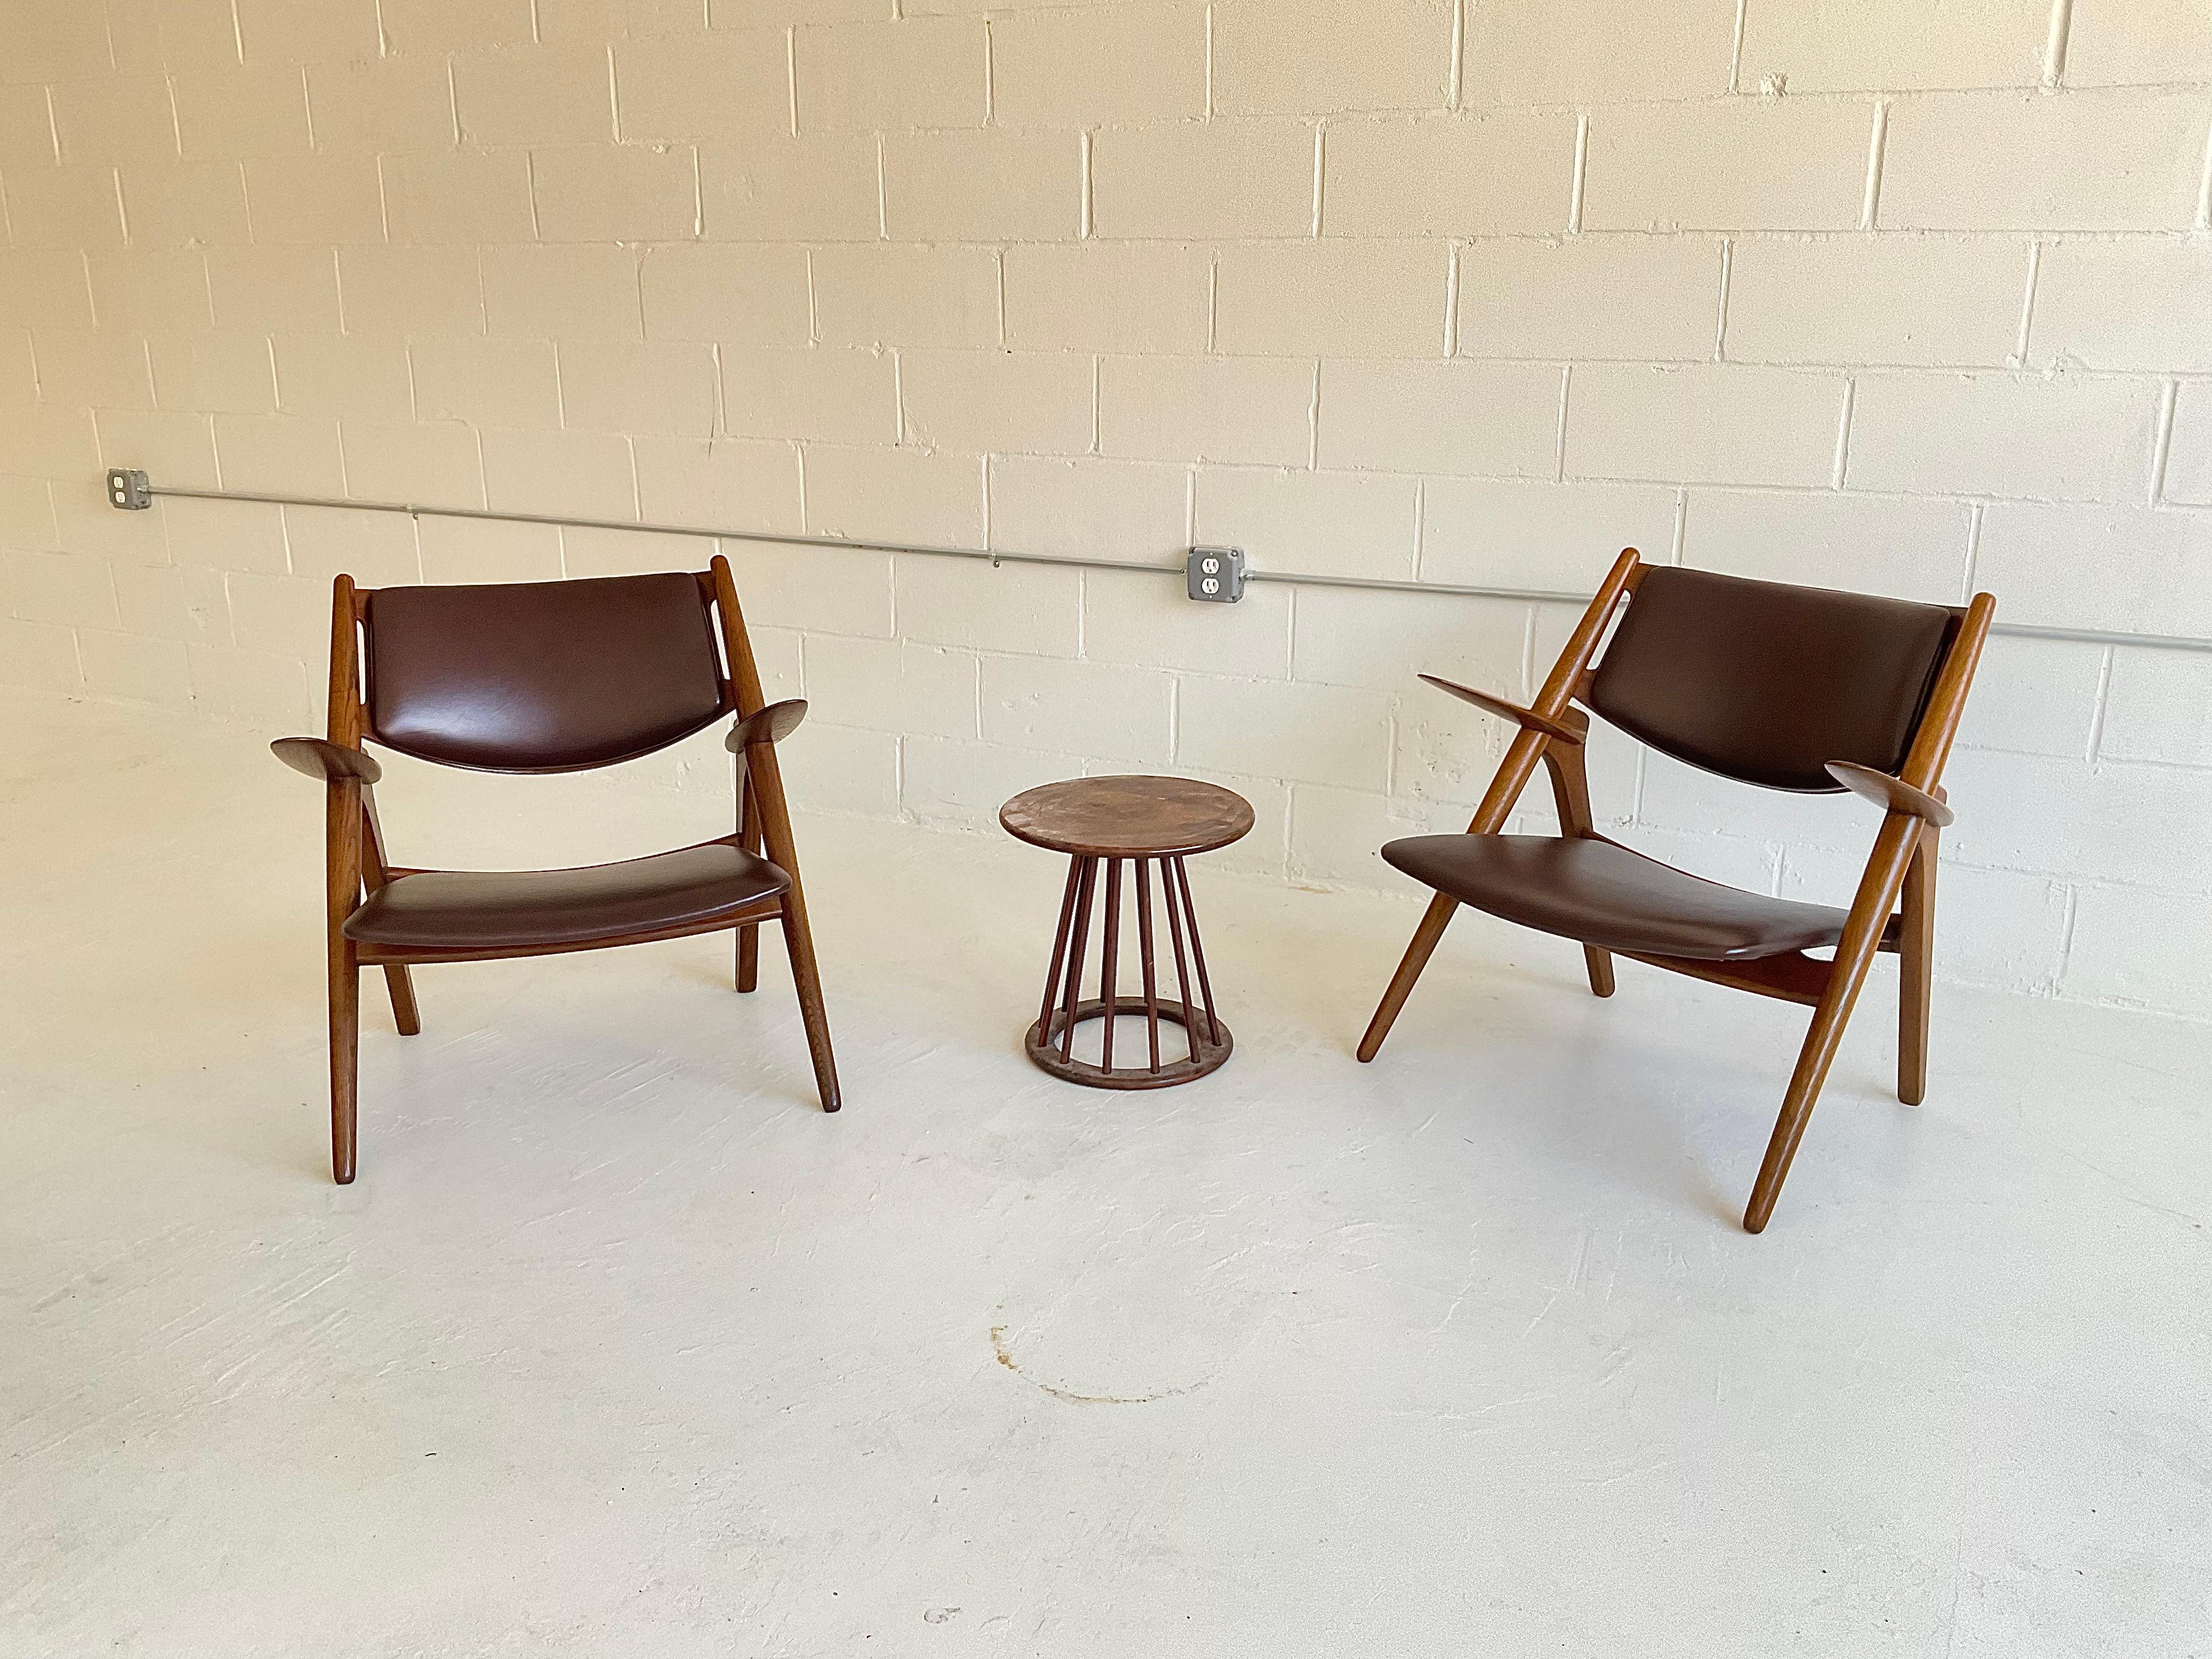 Hans Wegner Vintage Sawbuck Chairs for Carl Hansen CH28 in Oak & Leather, 1951 For Sale 3